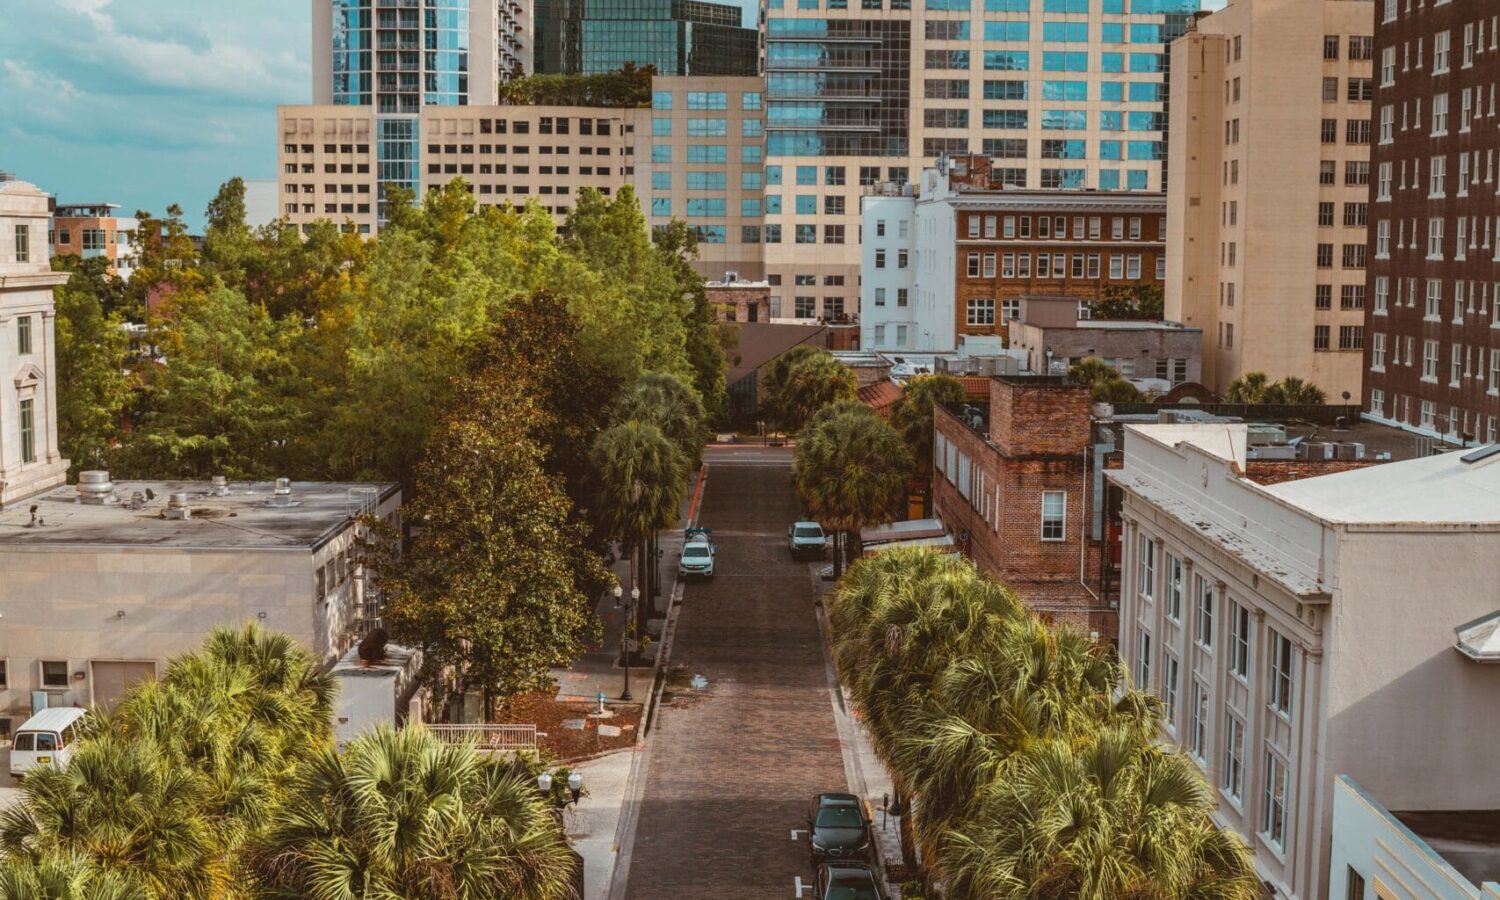 street view of downtown orlando